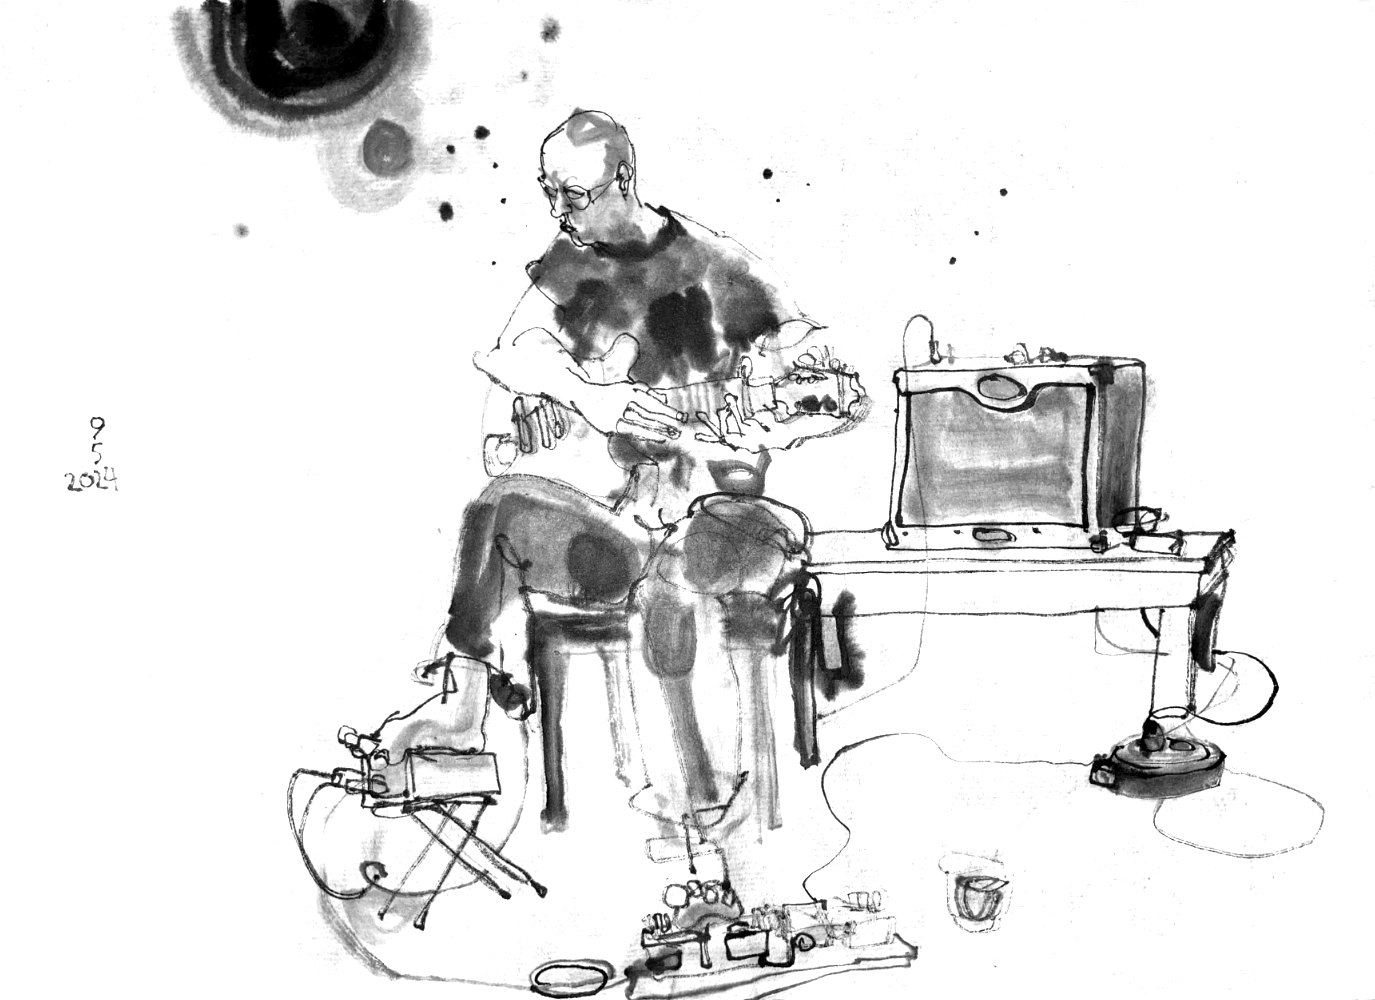 Ink drawing of a guitar player, using lots of pedals with bare feet.